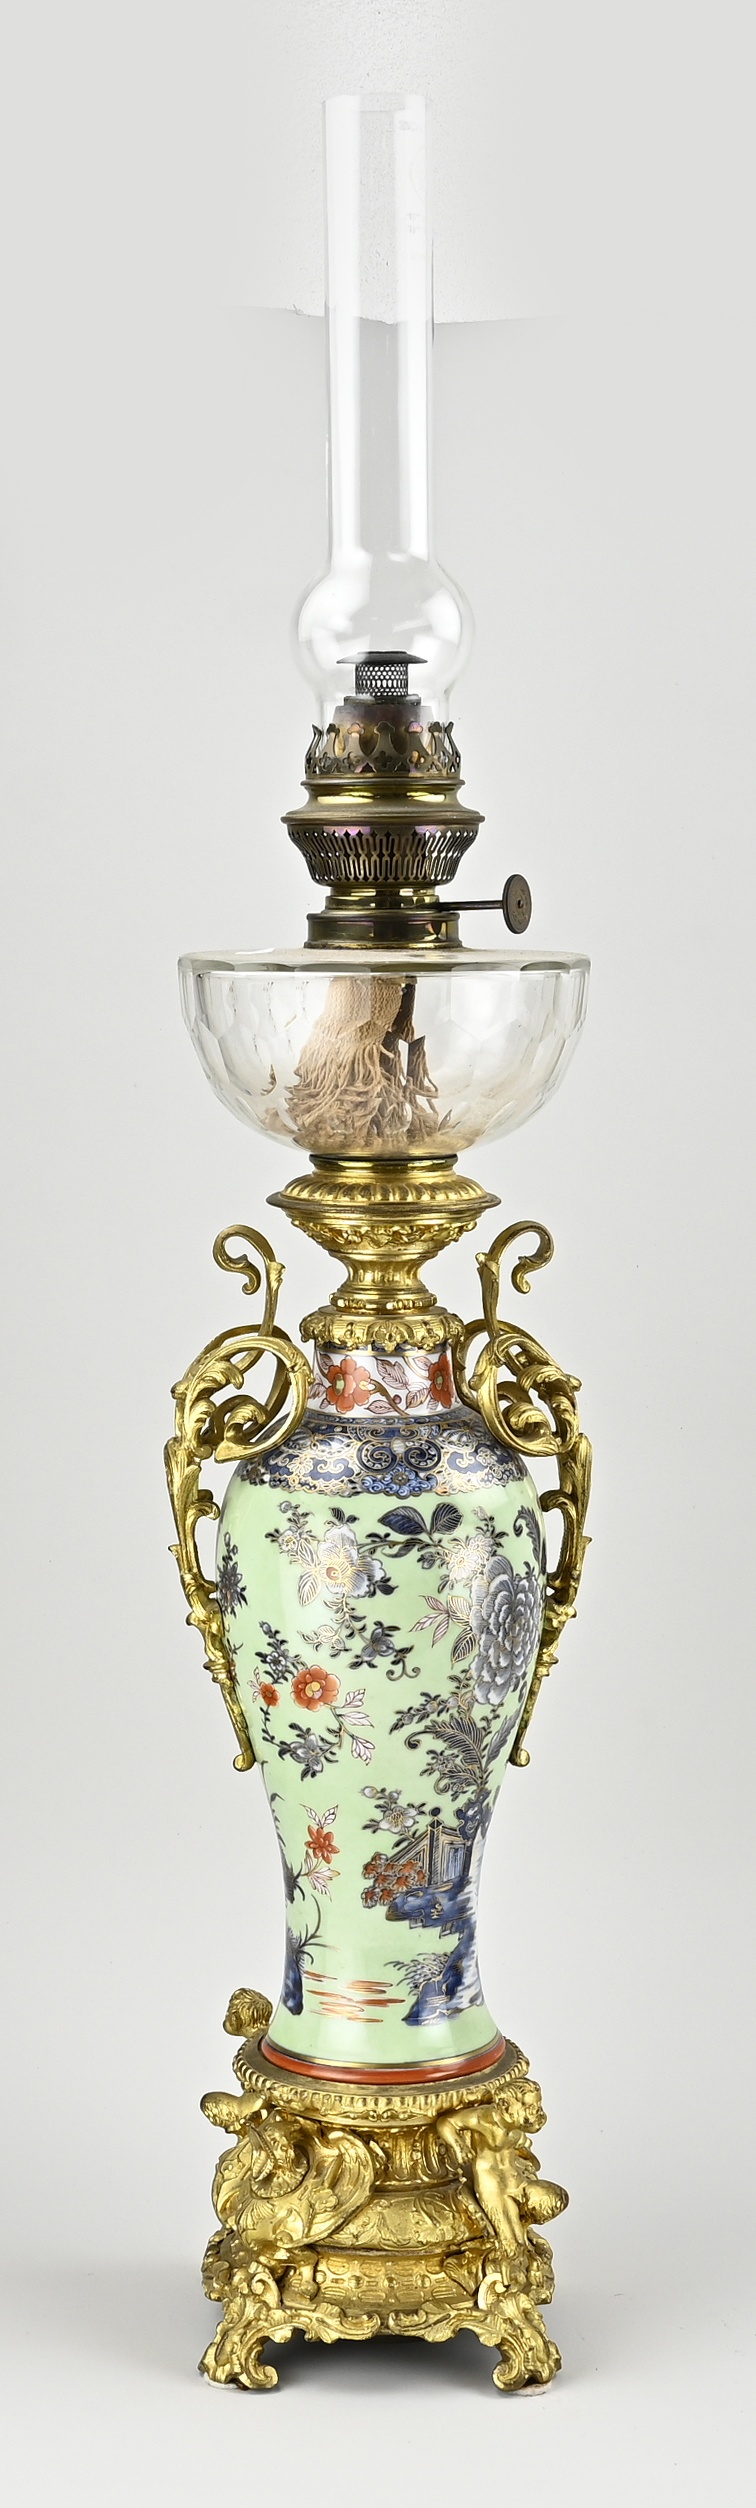 Antique oil lamp with Chinese vase, H 70 cm. - Image 2 of 2